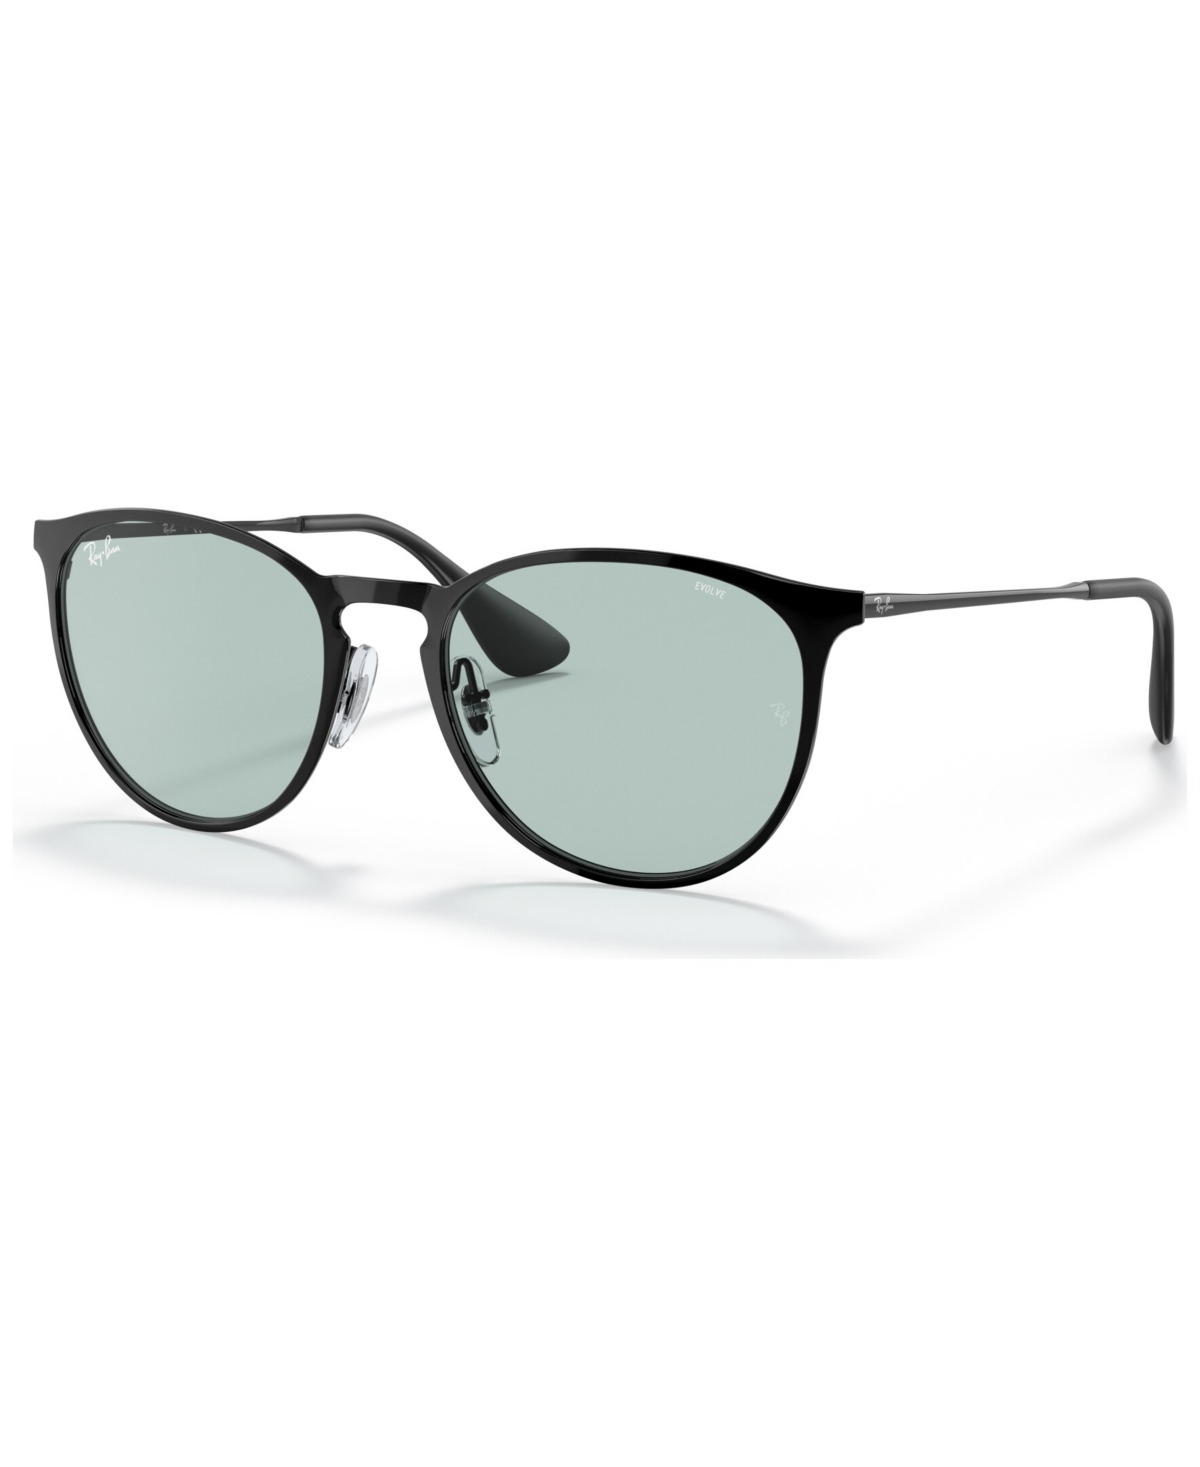 Ray Ban Rb3539 Sunglasses In Black